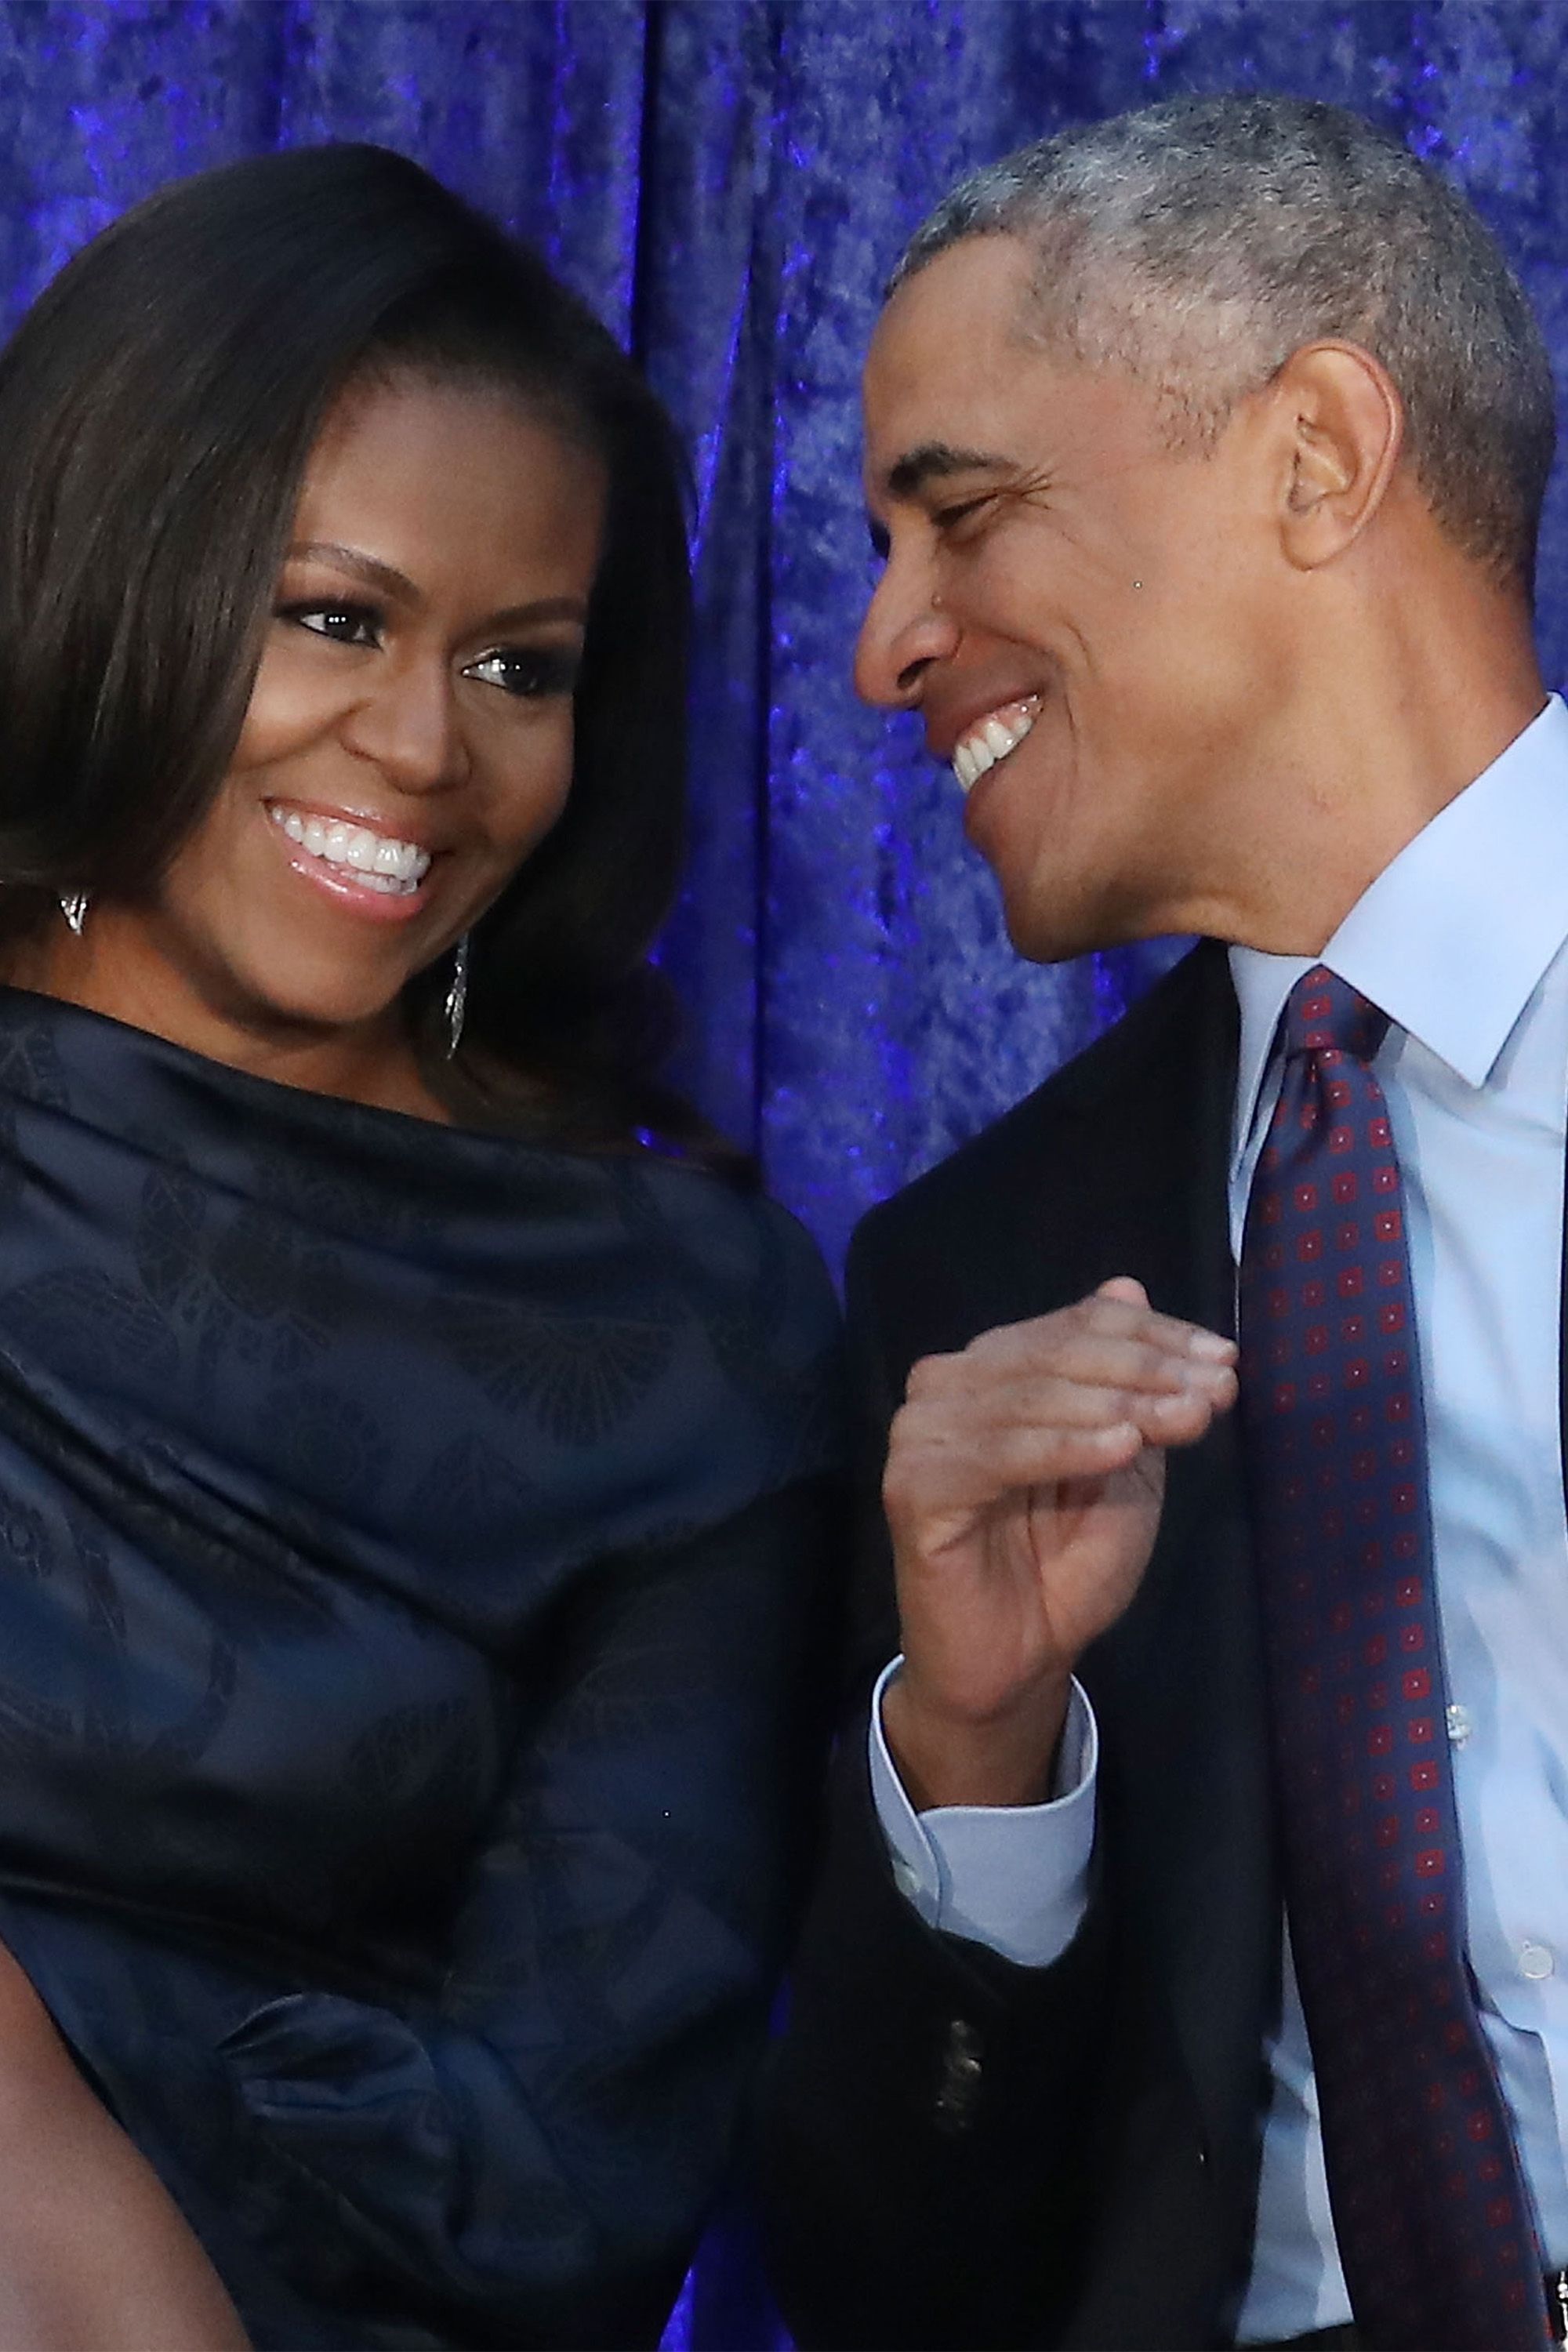 40 Power Couples That Are The Ultimate Couple Goals - The Best Power Couples